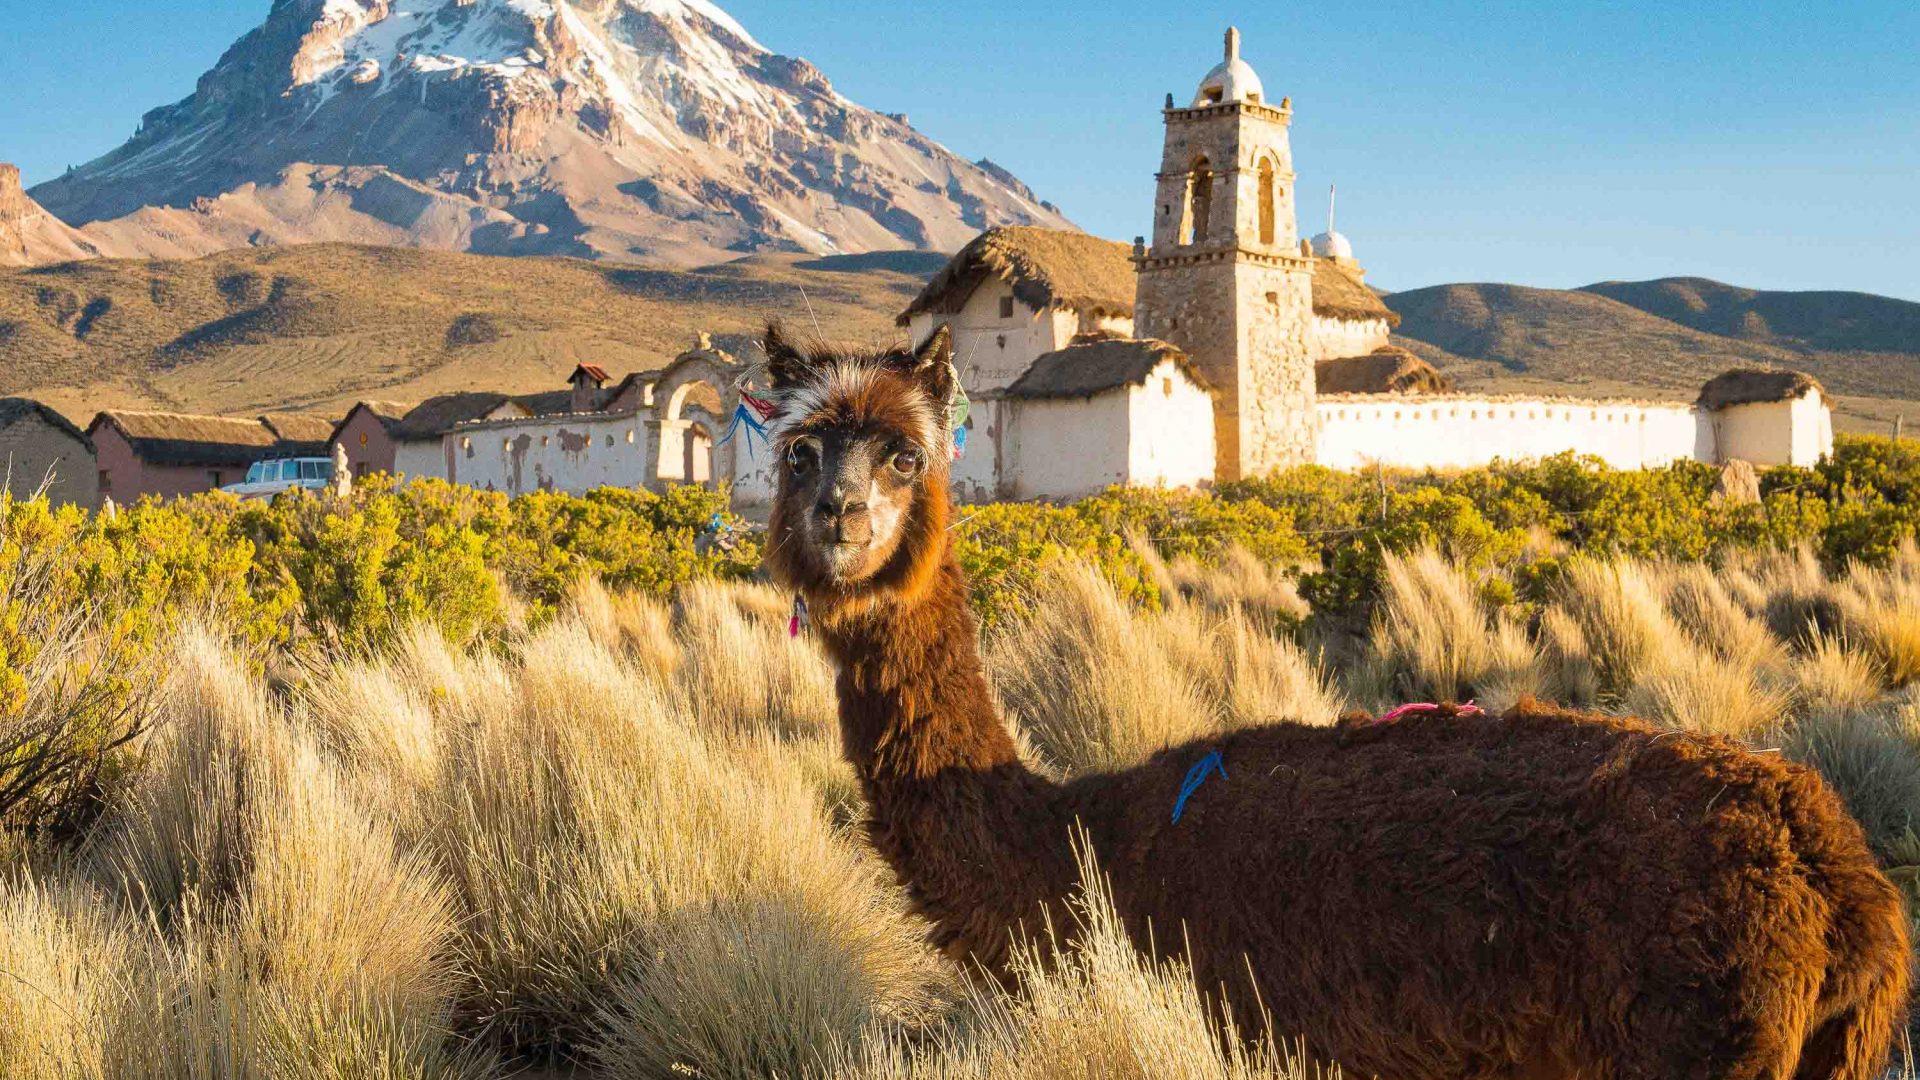 An alpaca stands in front of an old church and mountains.